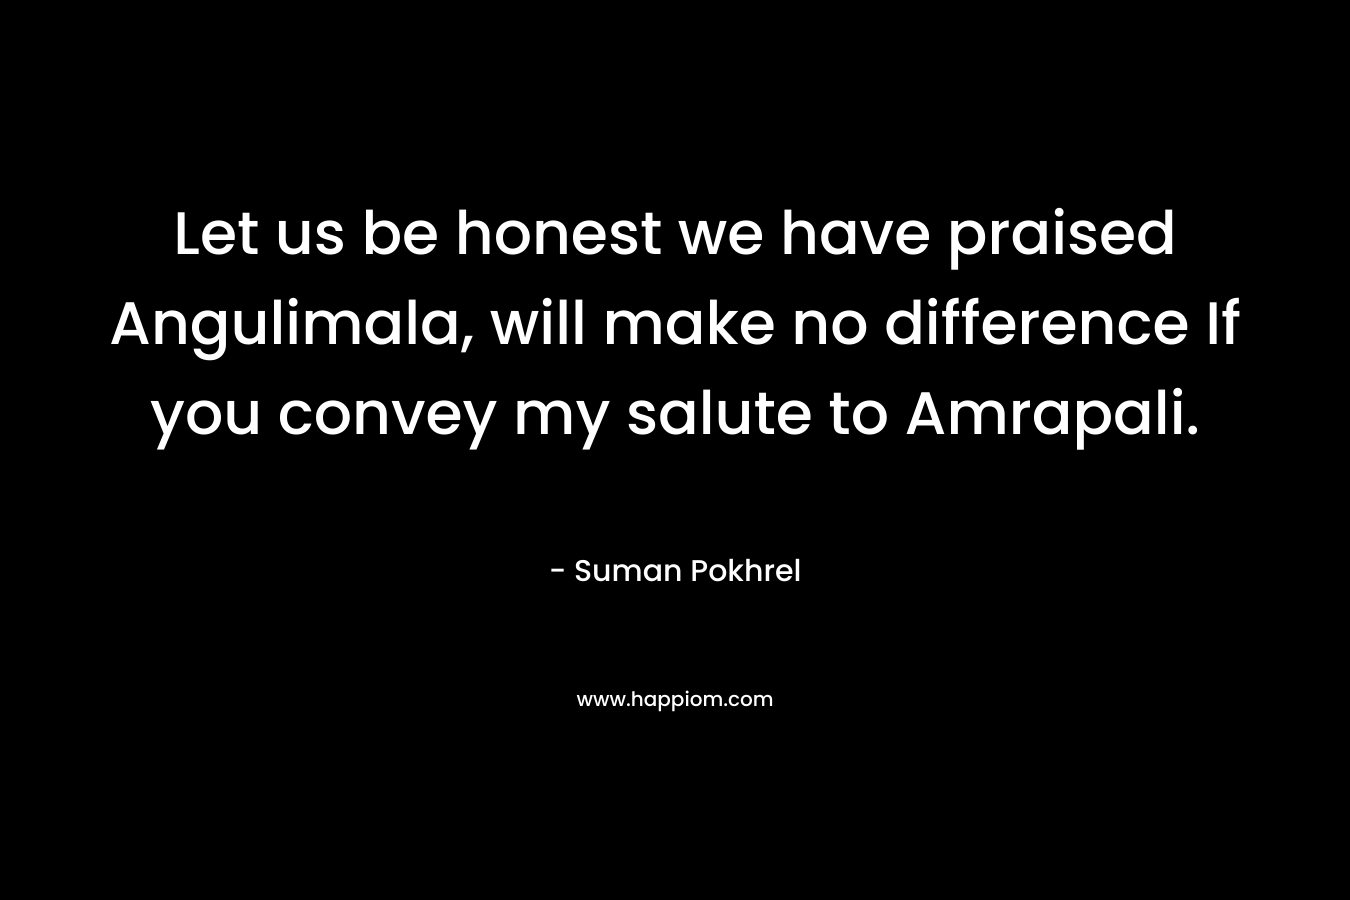 Let us be honest we have praised Angulimala, will make no difference If you convey my salute to Amrapali.